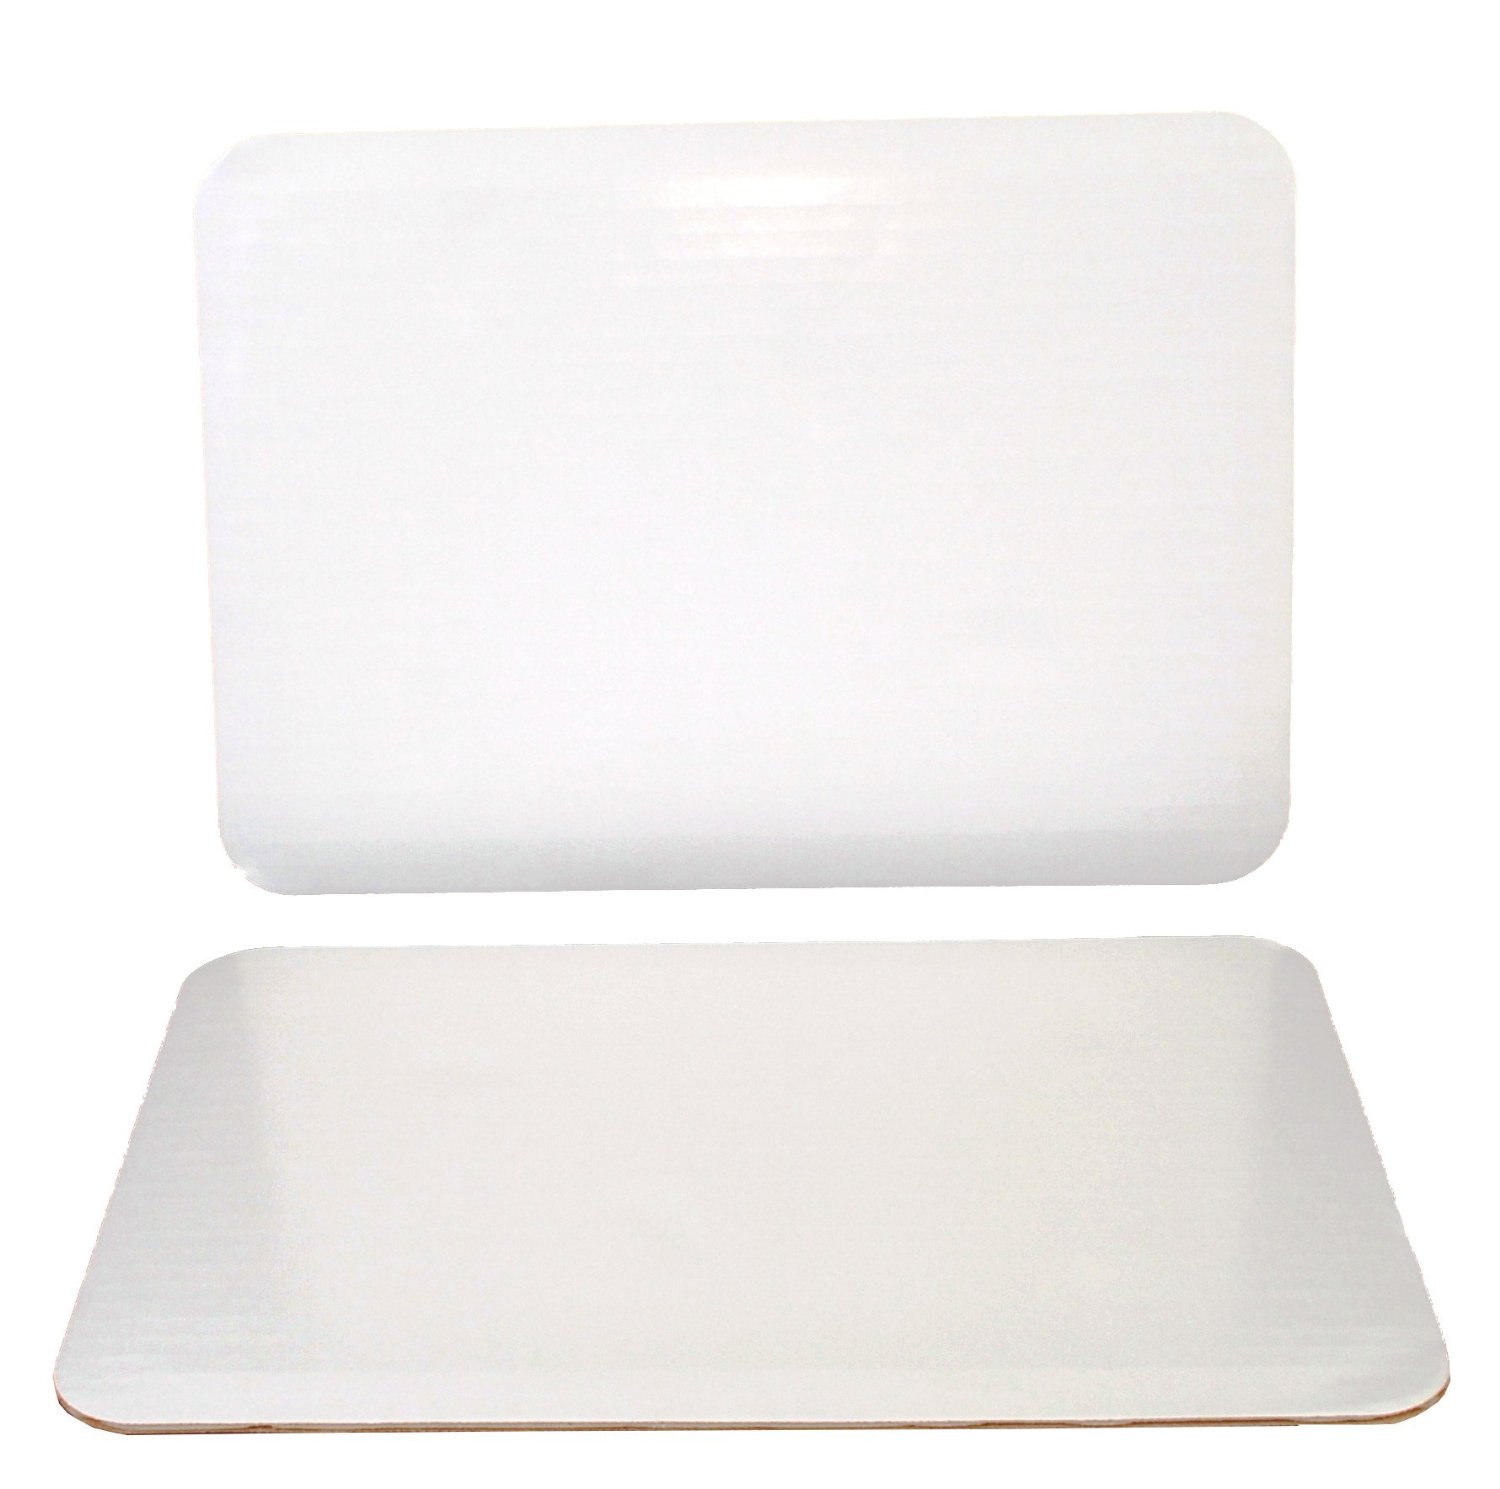 1149 White 14&quot;x10&quot; 1/4 Sheet
Coated Greaseproof Pad - 100